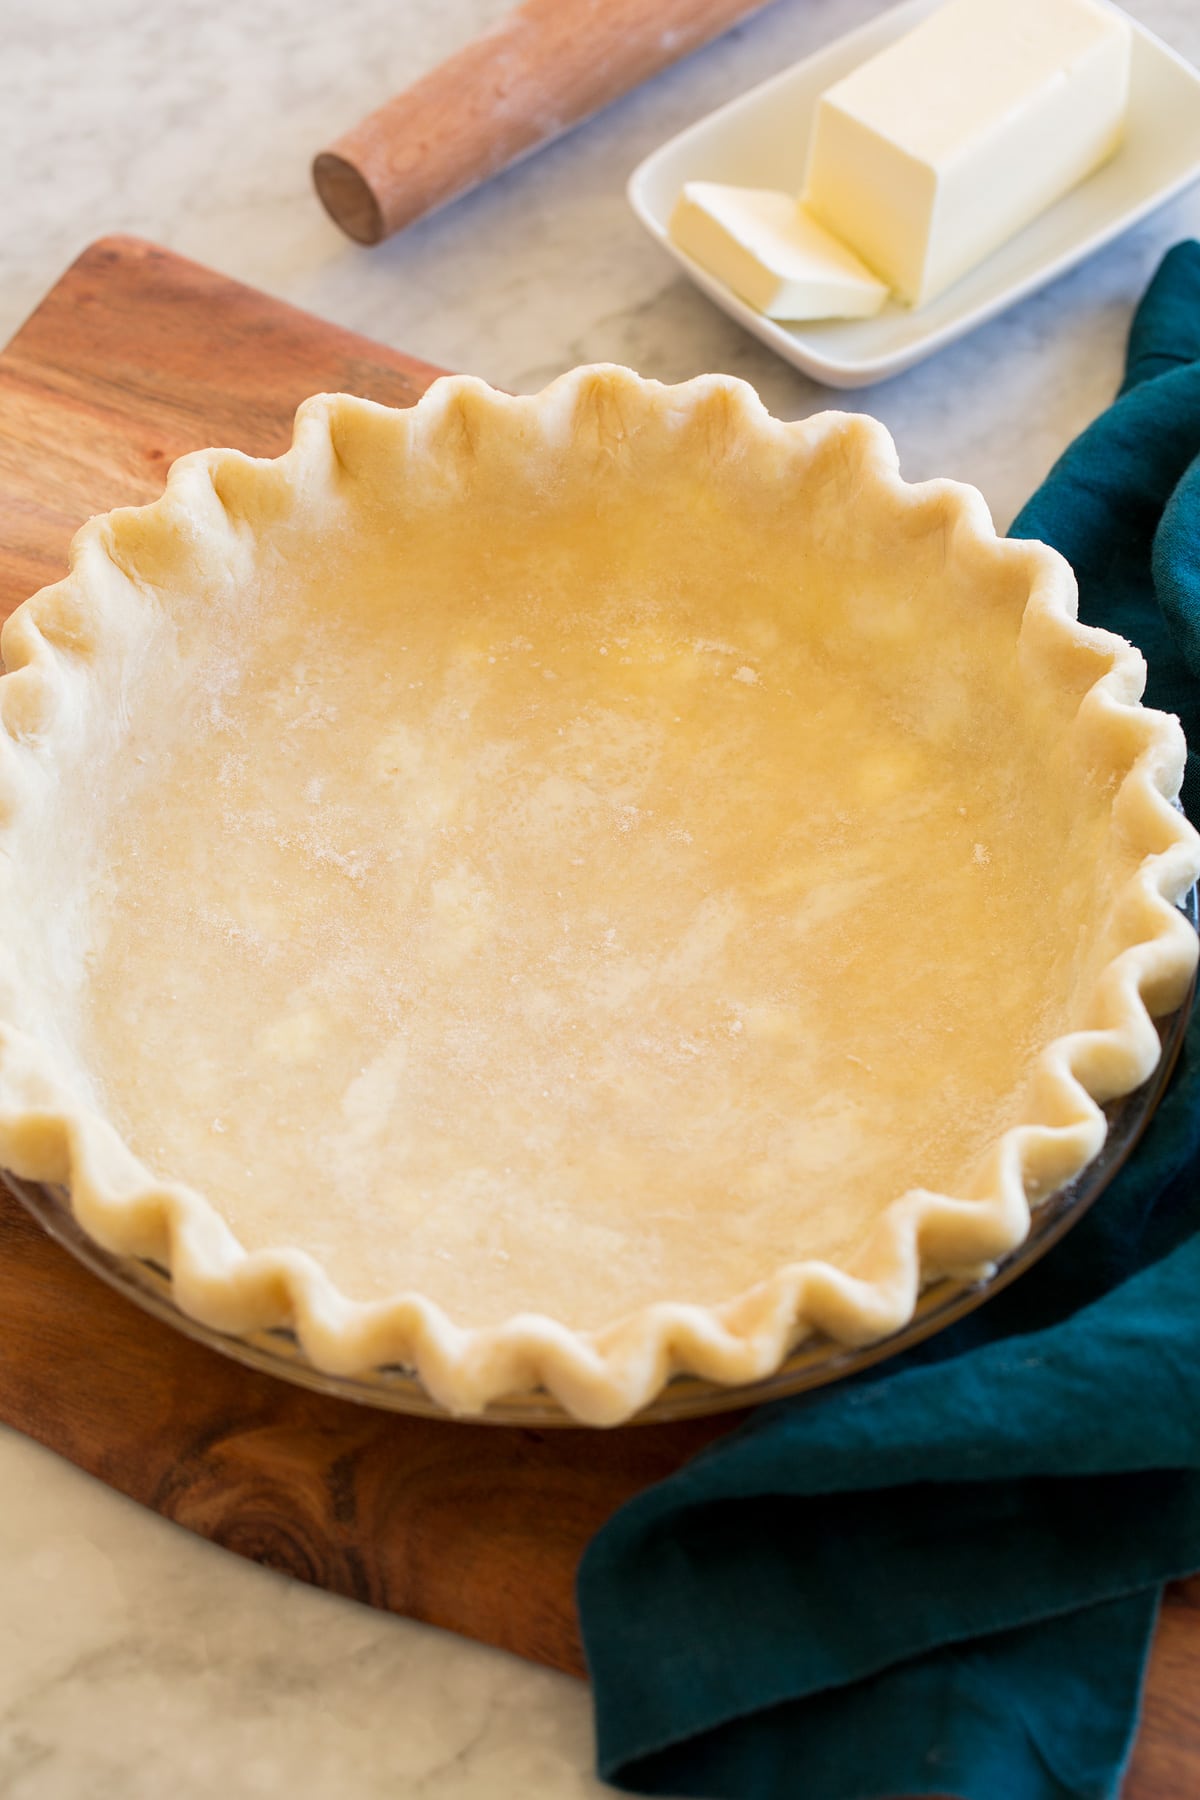 Pie Crust shown before baking in a glass pie pan set on a wooden platter.